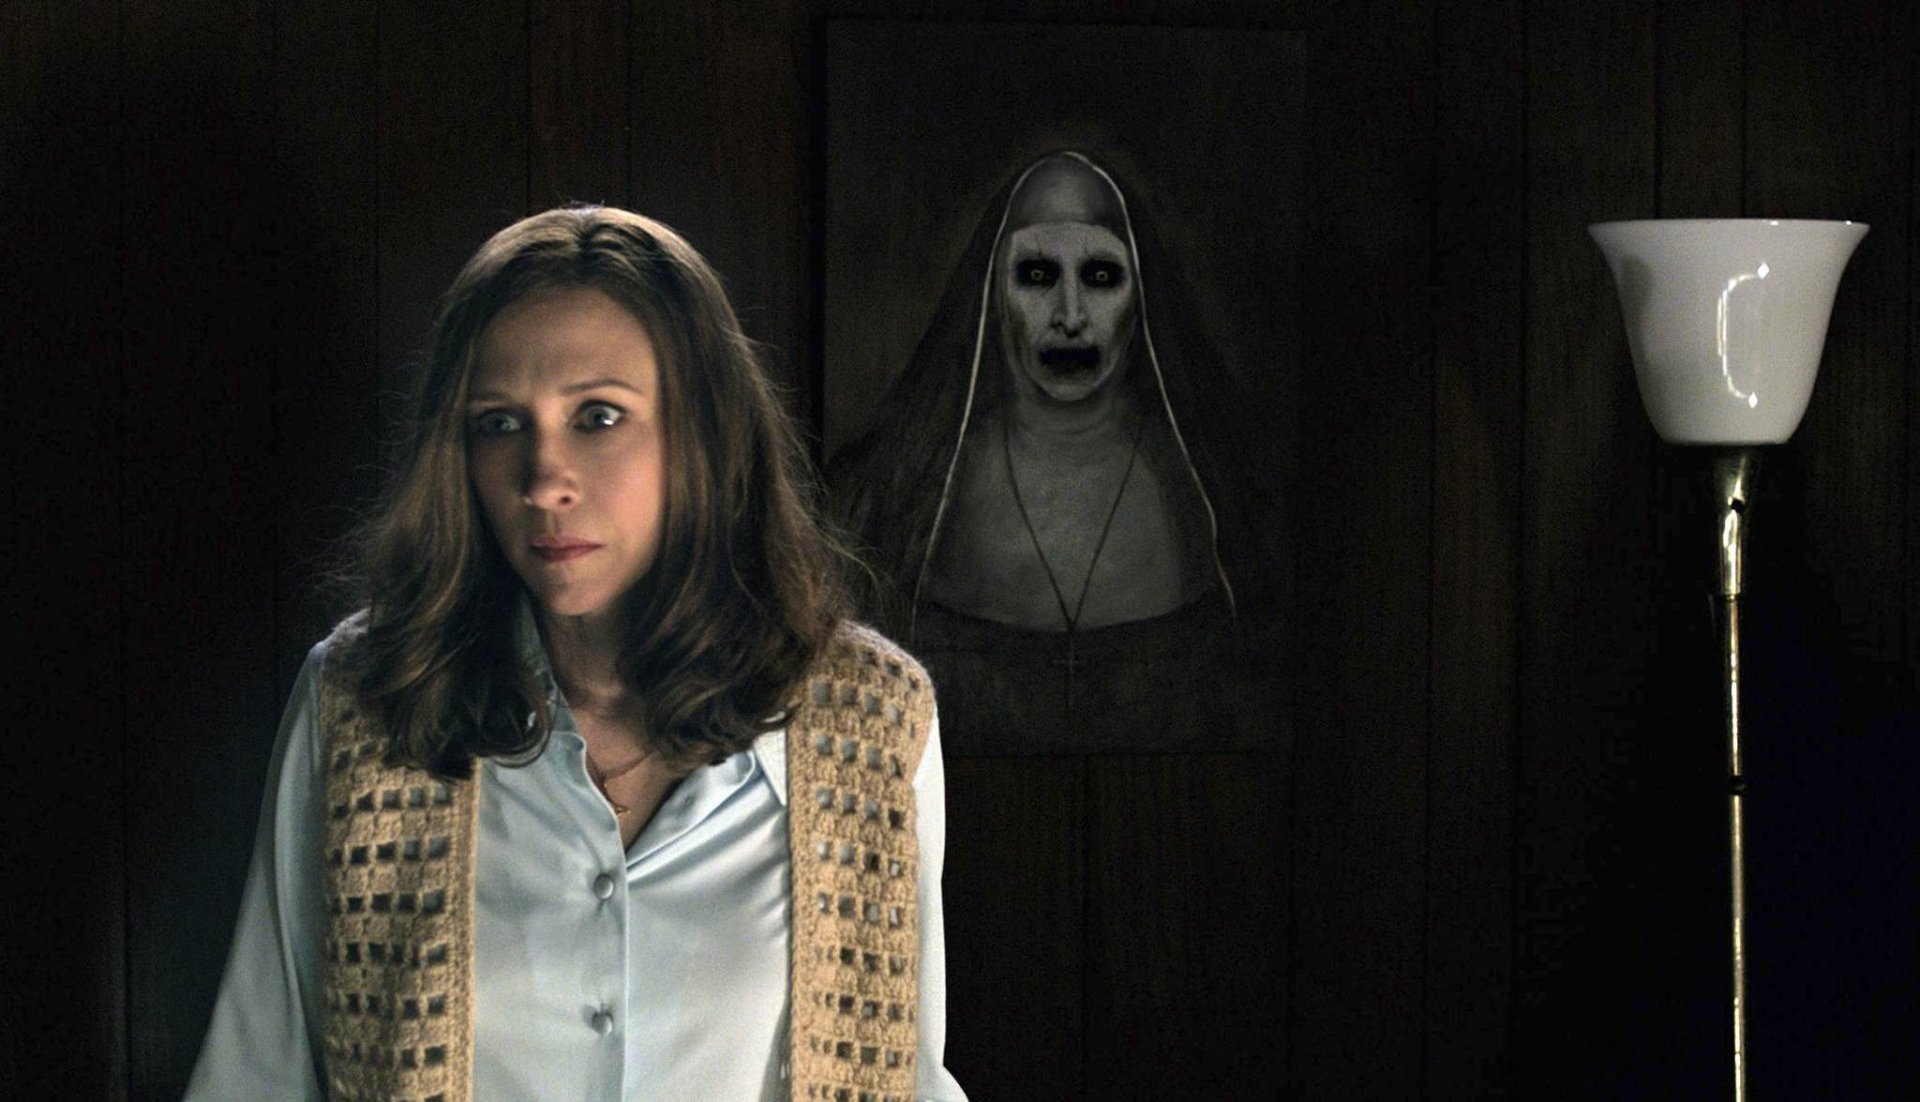 the conjuring 2 full movie hd online 4k